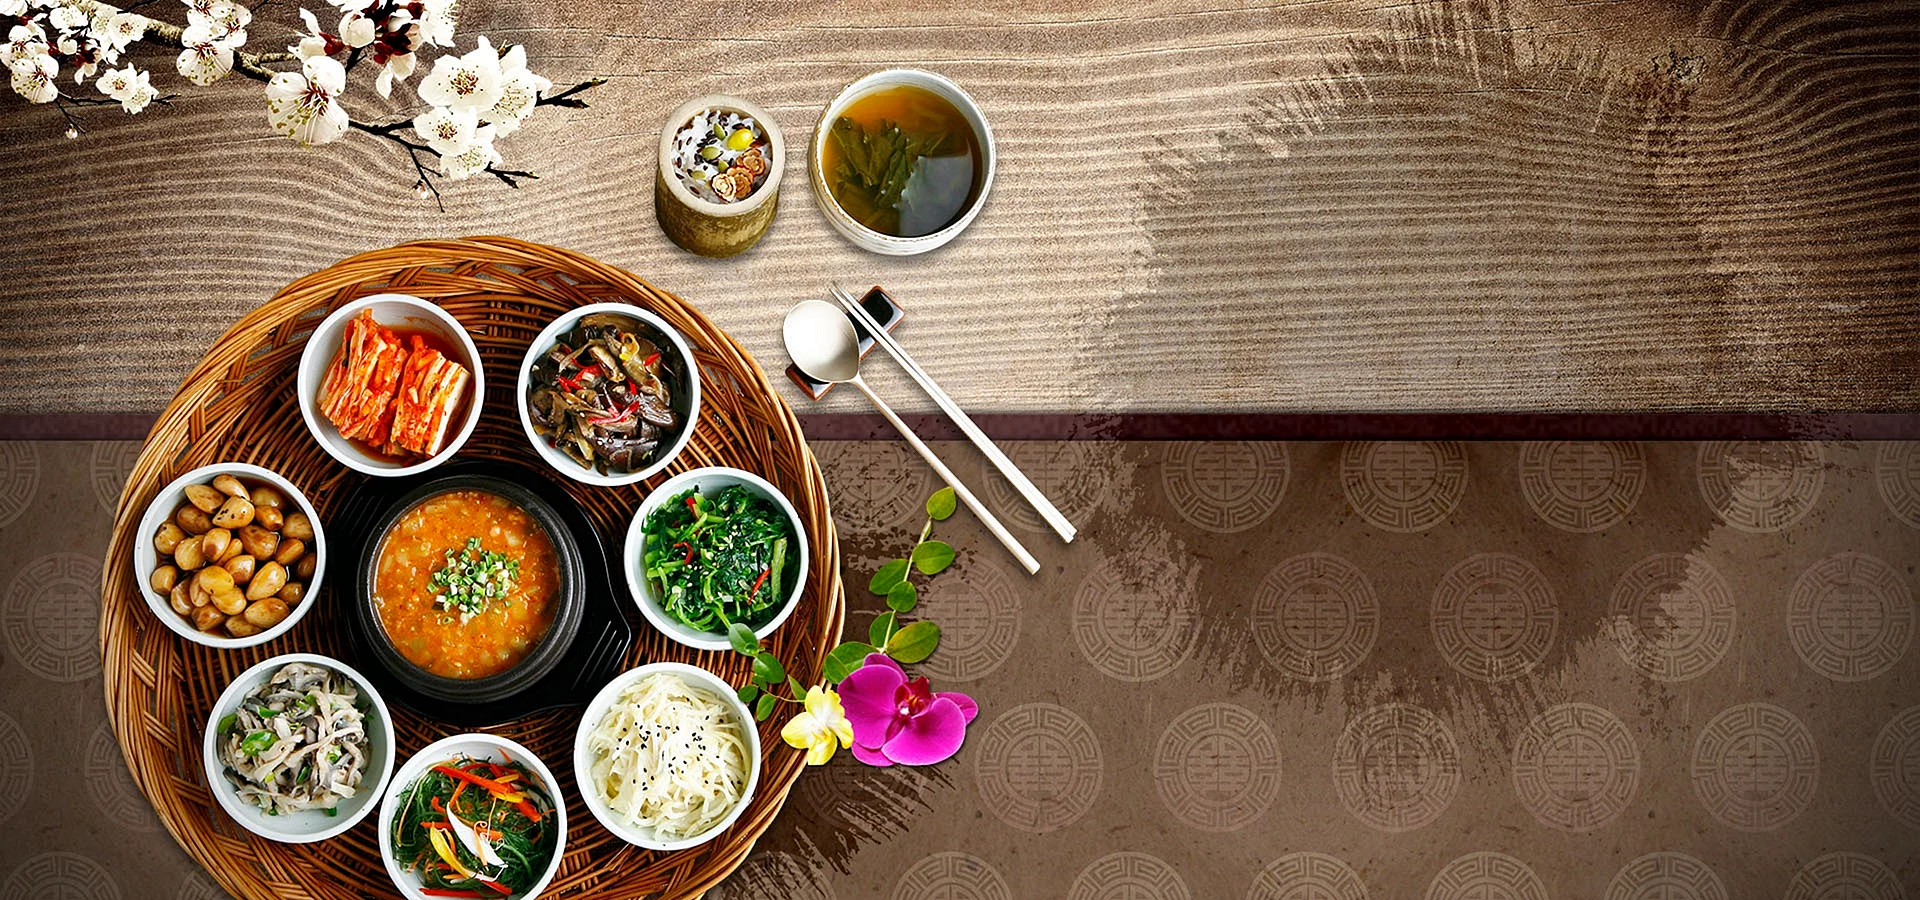 Chinese Food Design Background Wallpaper